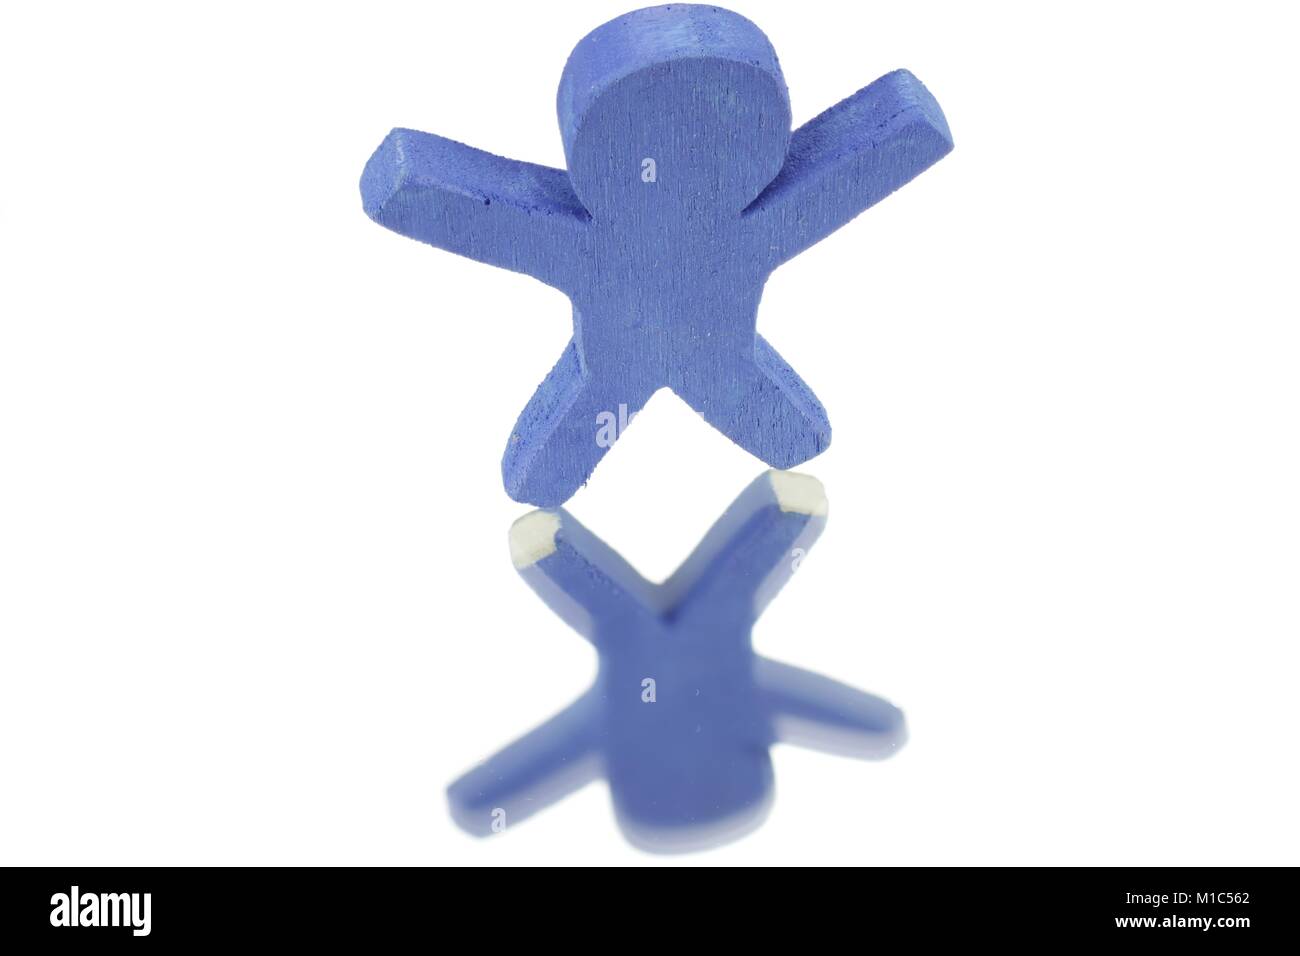 Little blue male in front of white background and reflection Stock Photo